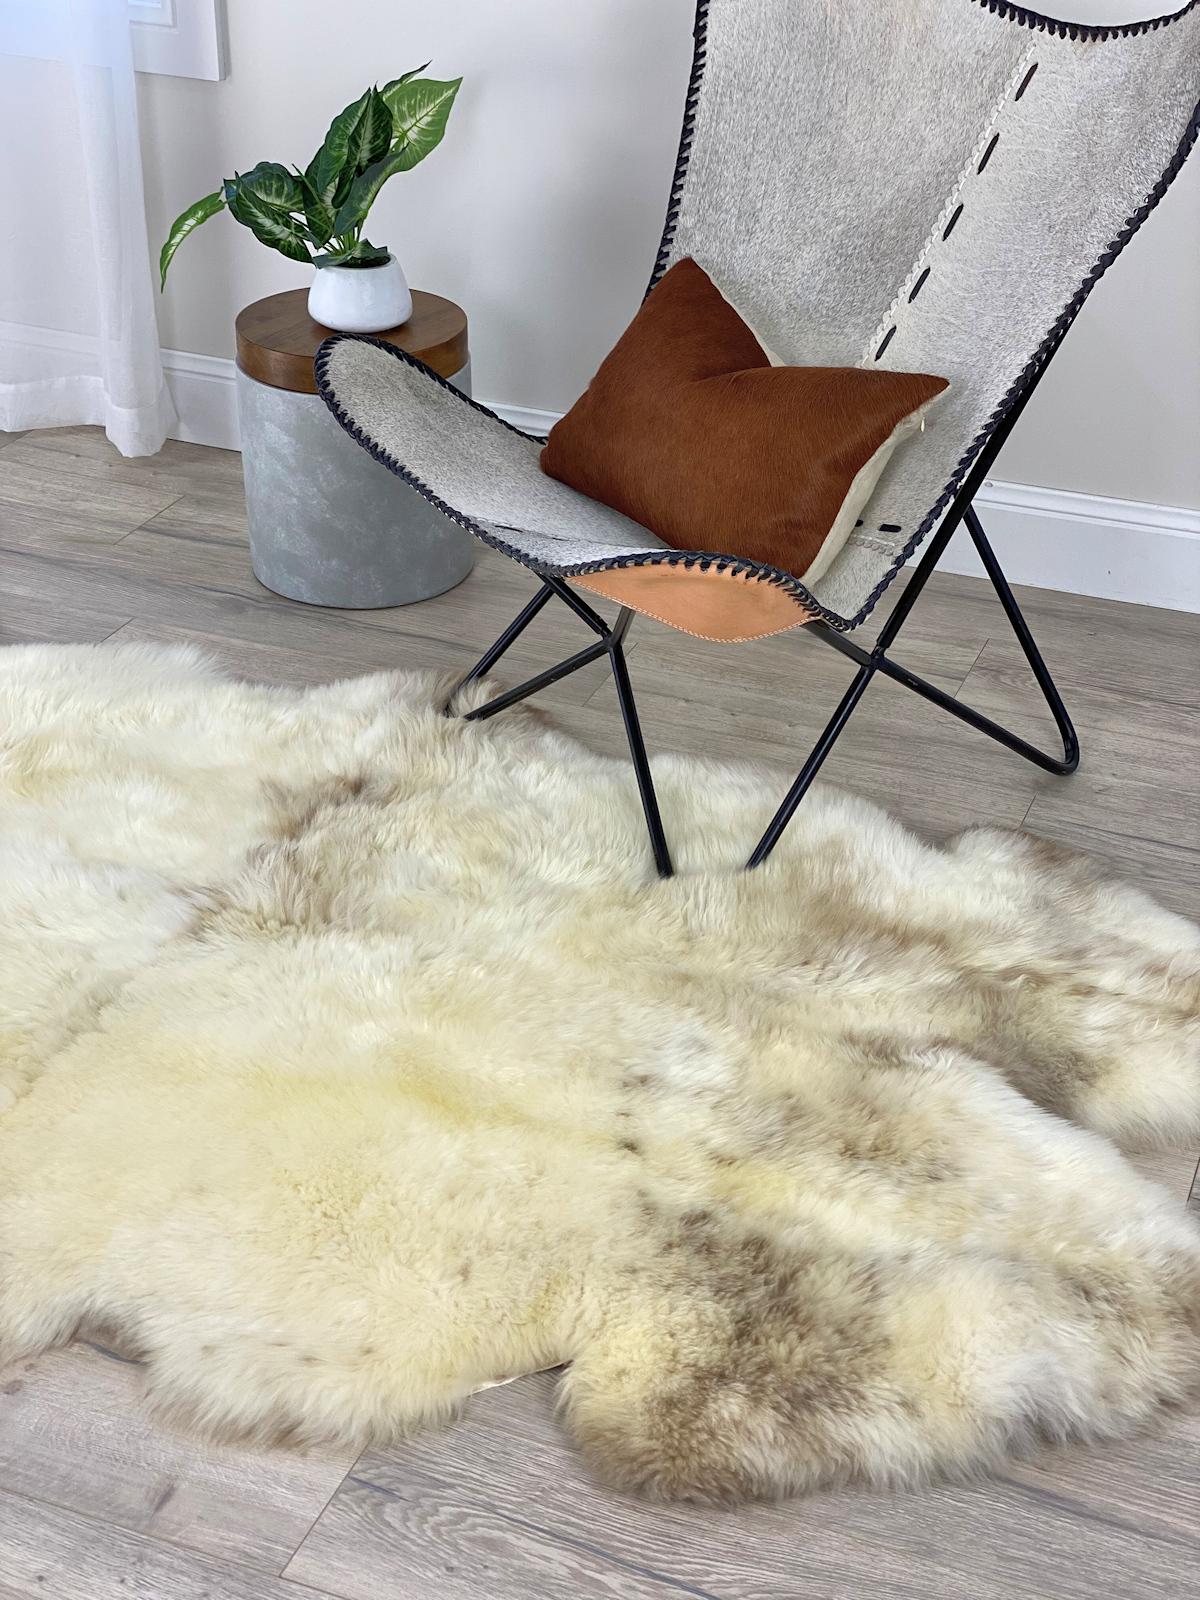 Elevate your interiors with luxurious comfort found in this beautiful and divine, English Sheepskin Rug. Boasting with the most extraordinary natural color tones and markings, each Jacob sheepskin used has been individually selected and pre-matched